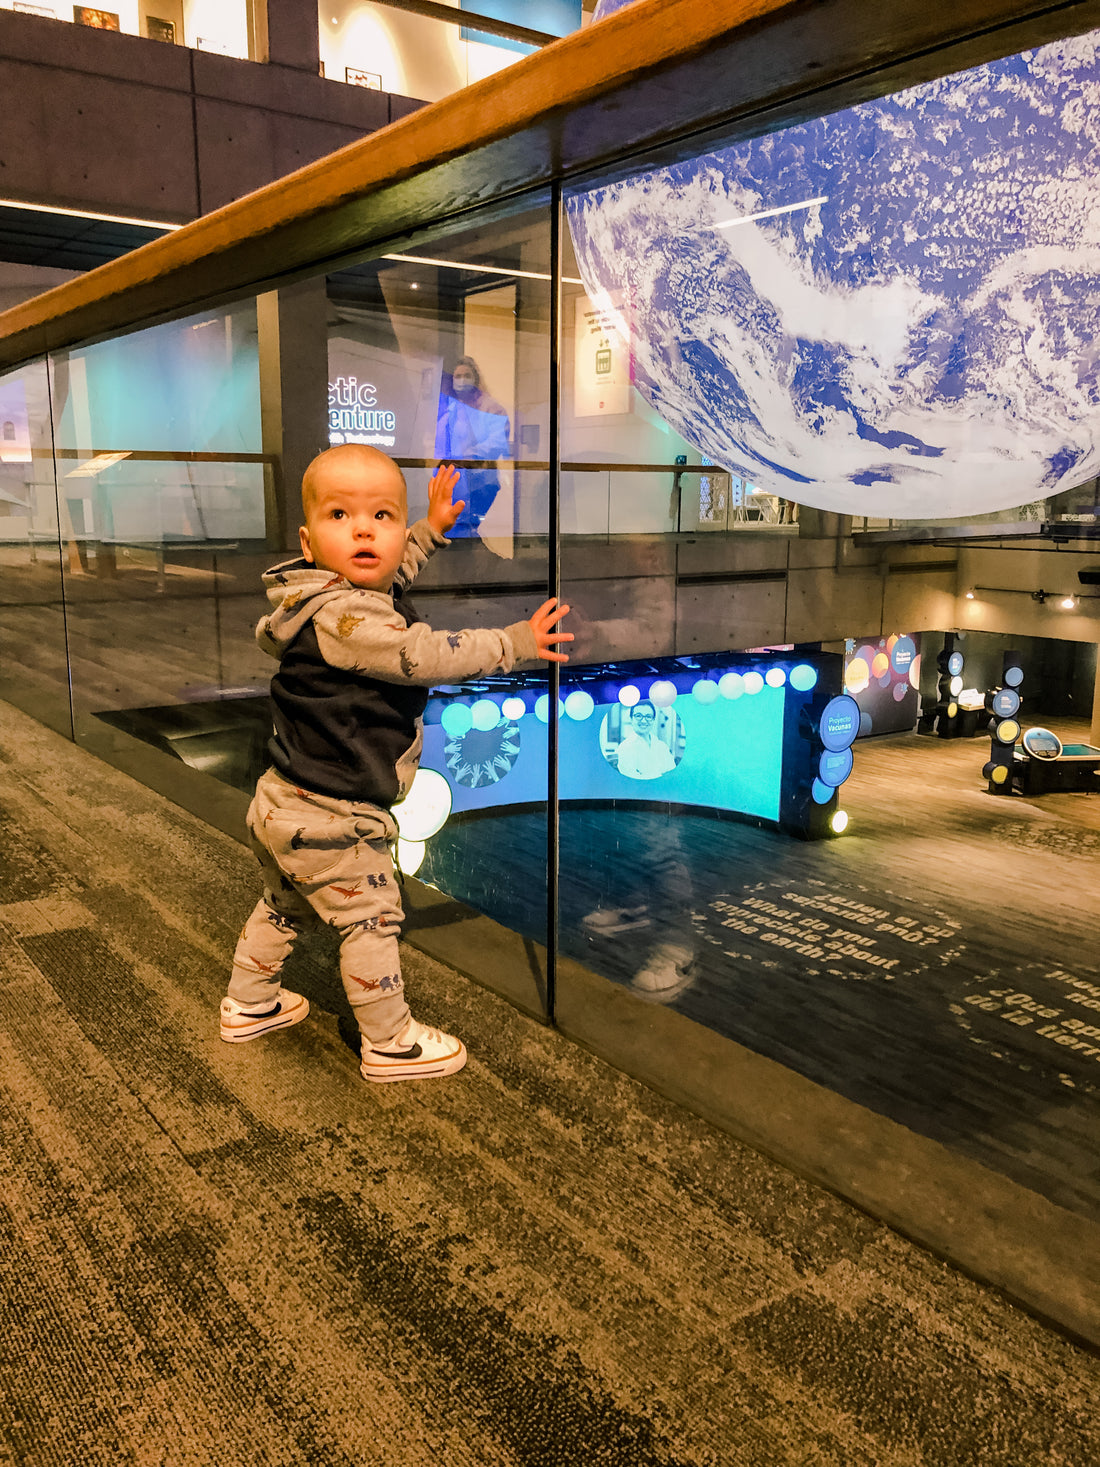 7 Tips for Visiting the Museum of Science with Kids